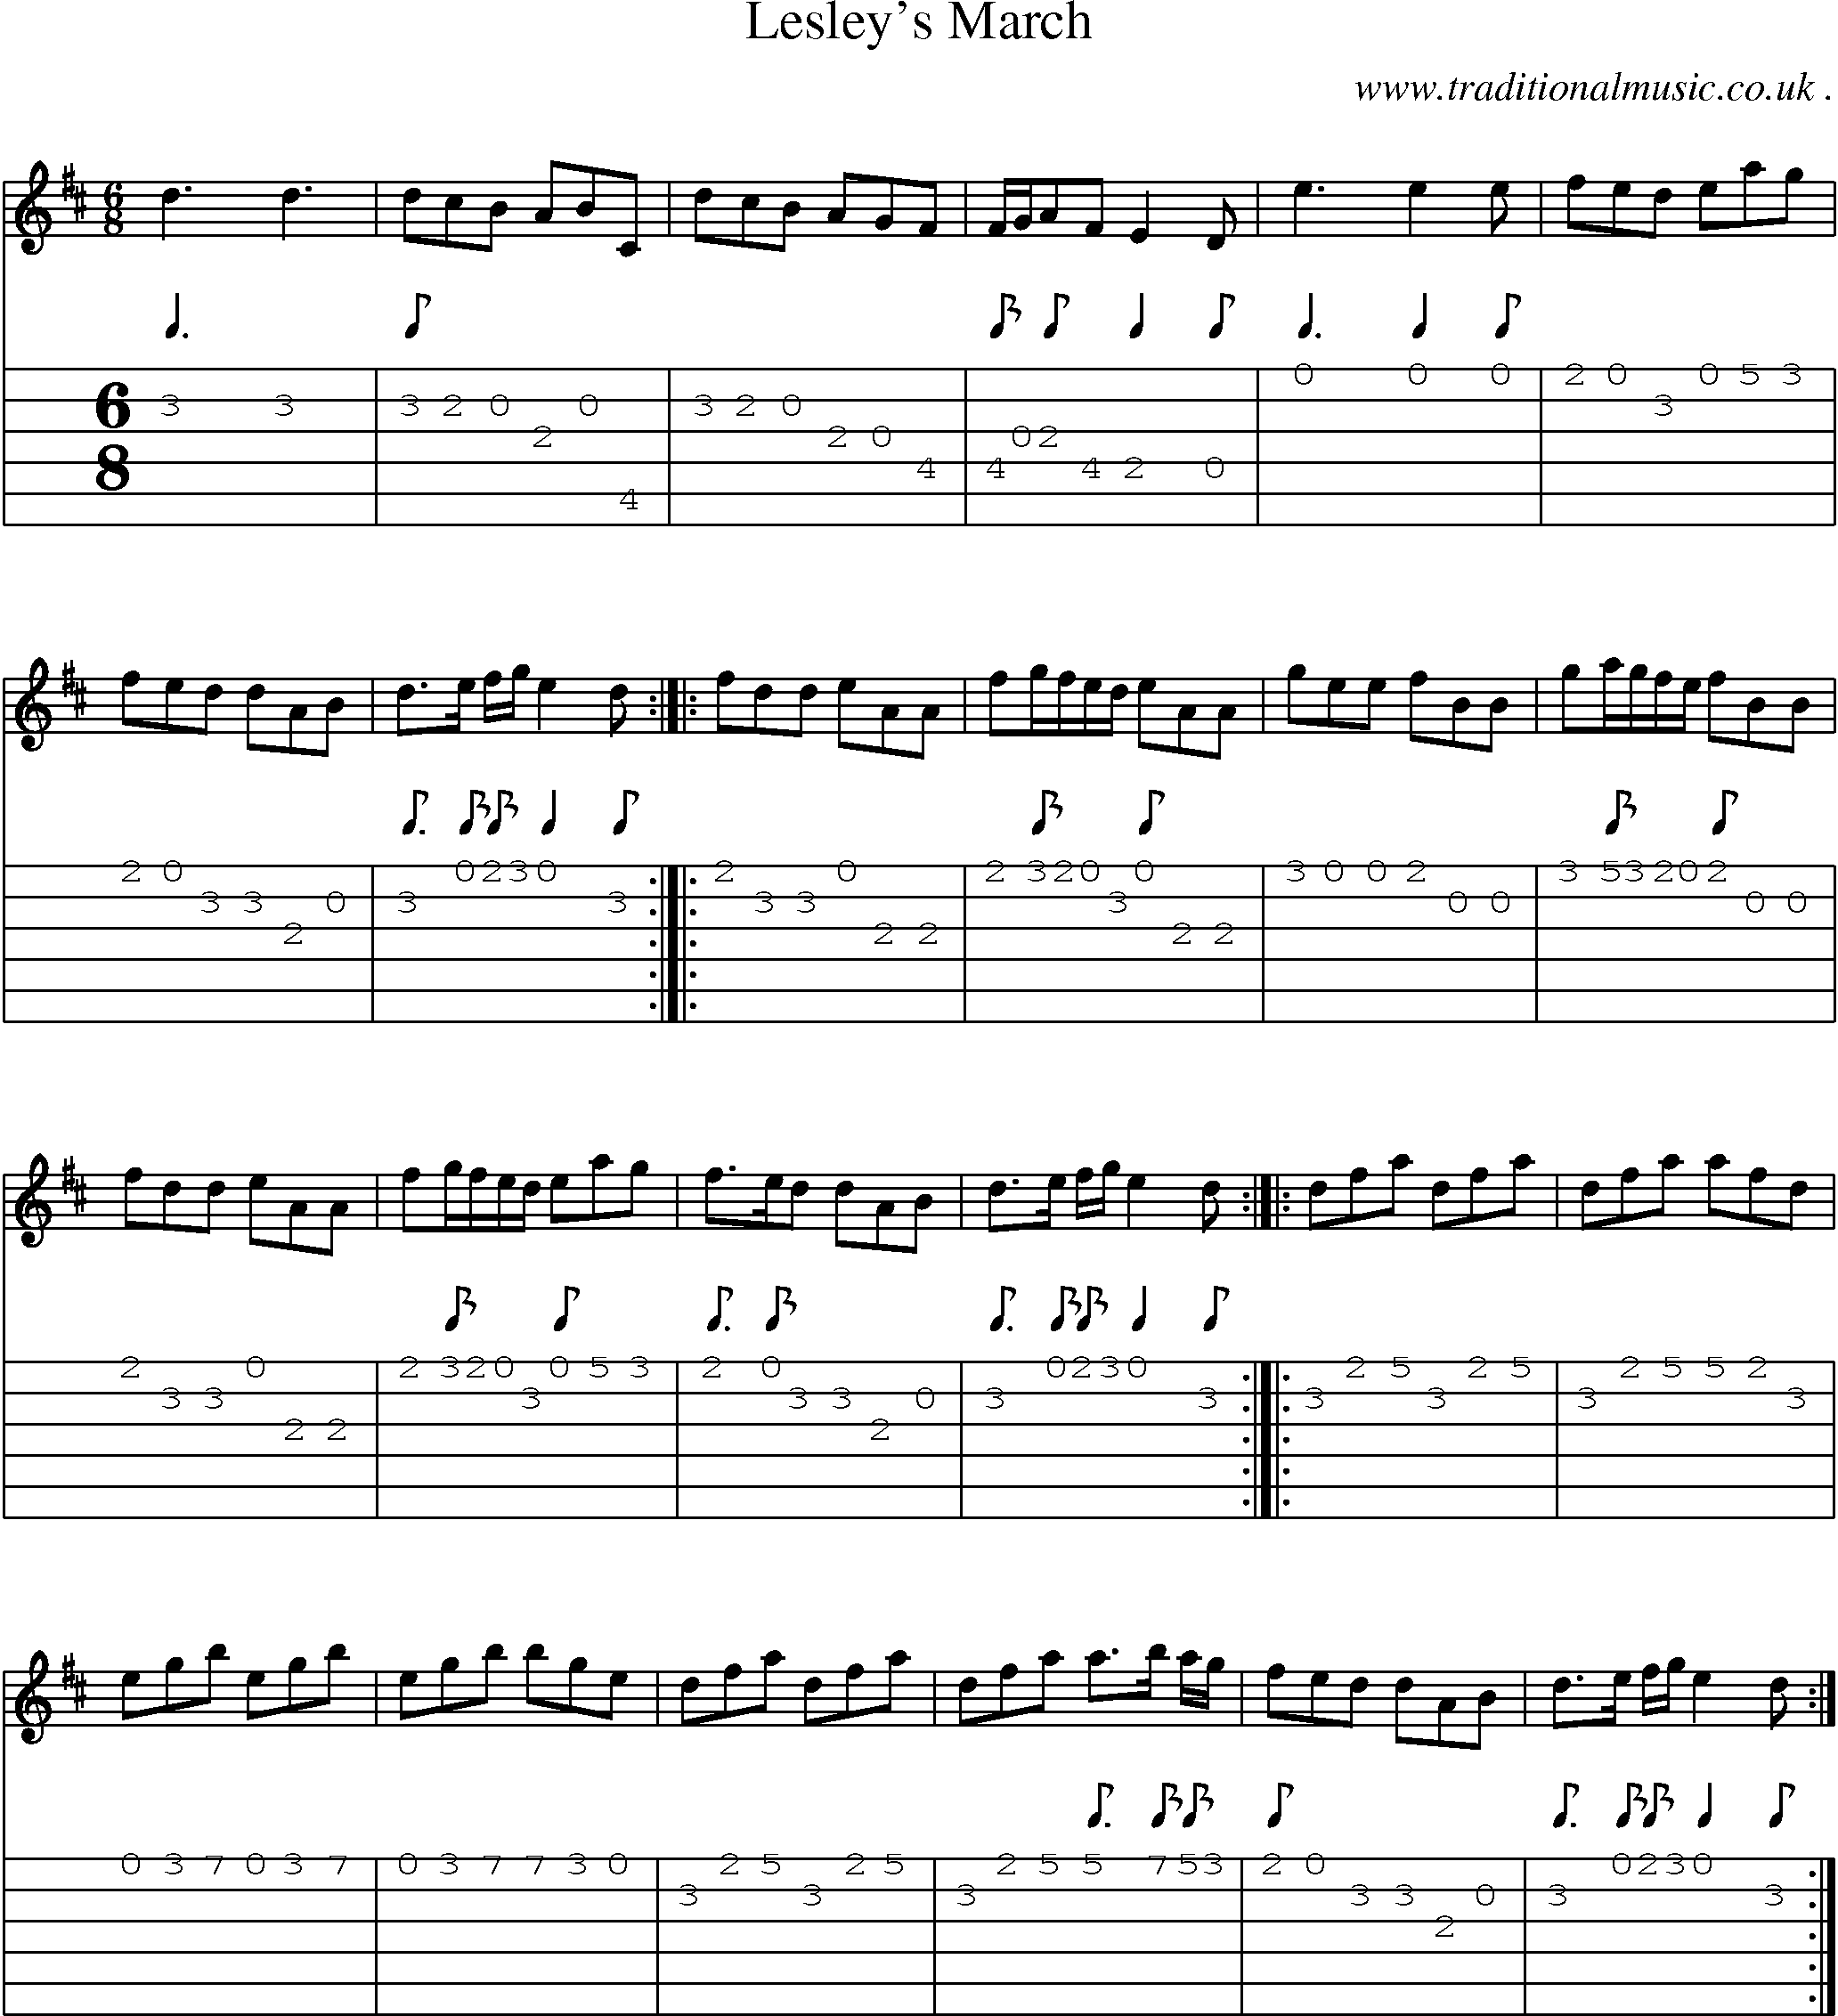 Sheet-music  score, Chords and Guitar Tabs for Lesleys March